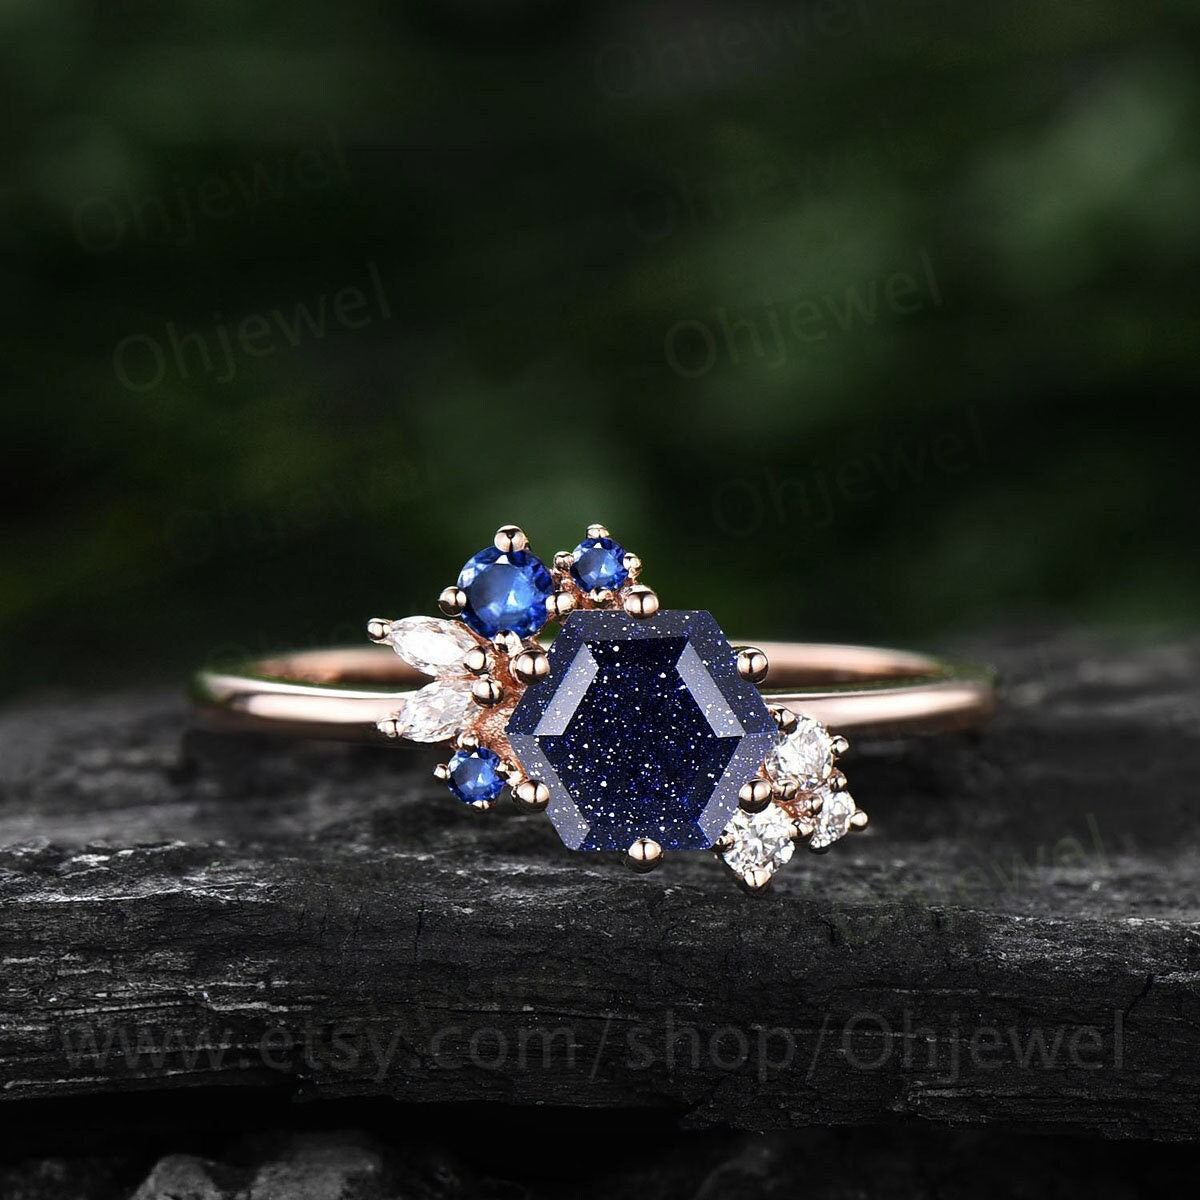 Hexagon cut blue sandstone ring rose gold silver for women vintage unique engagement ring dainty art deco sapphire moissanite wedding ring